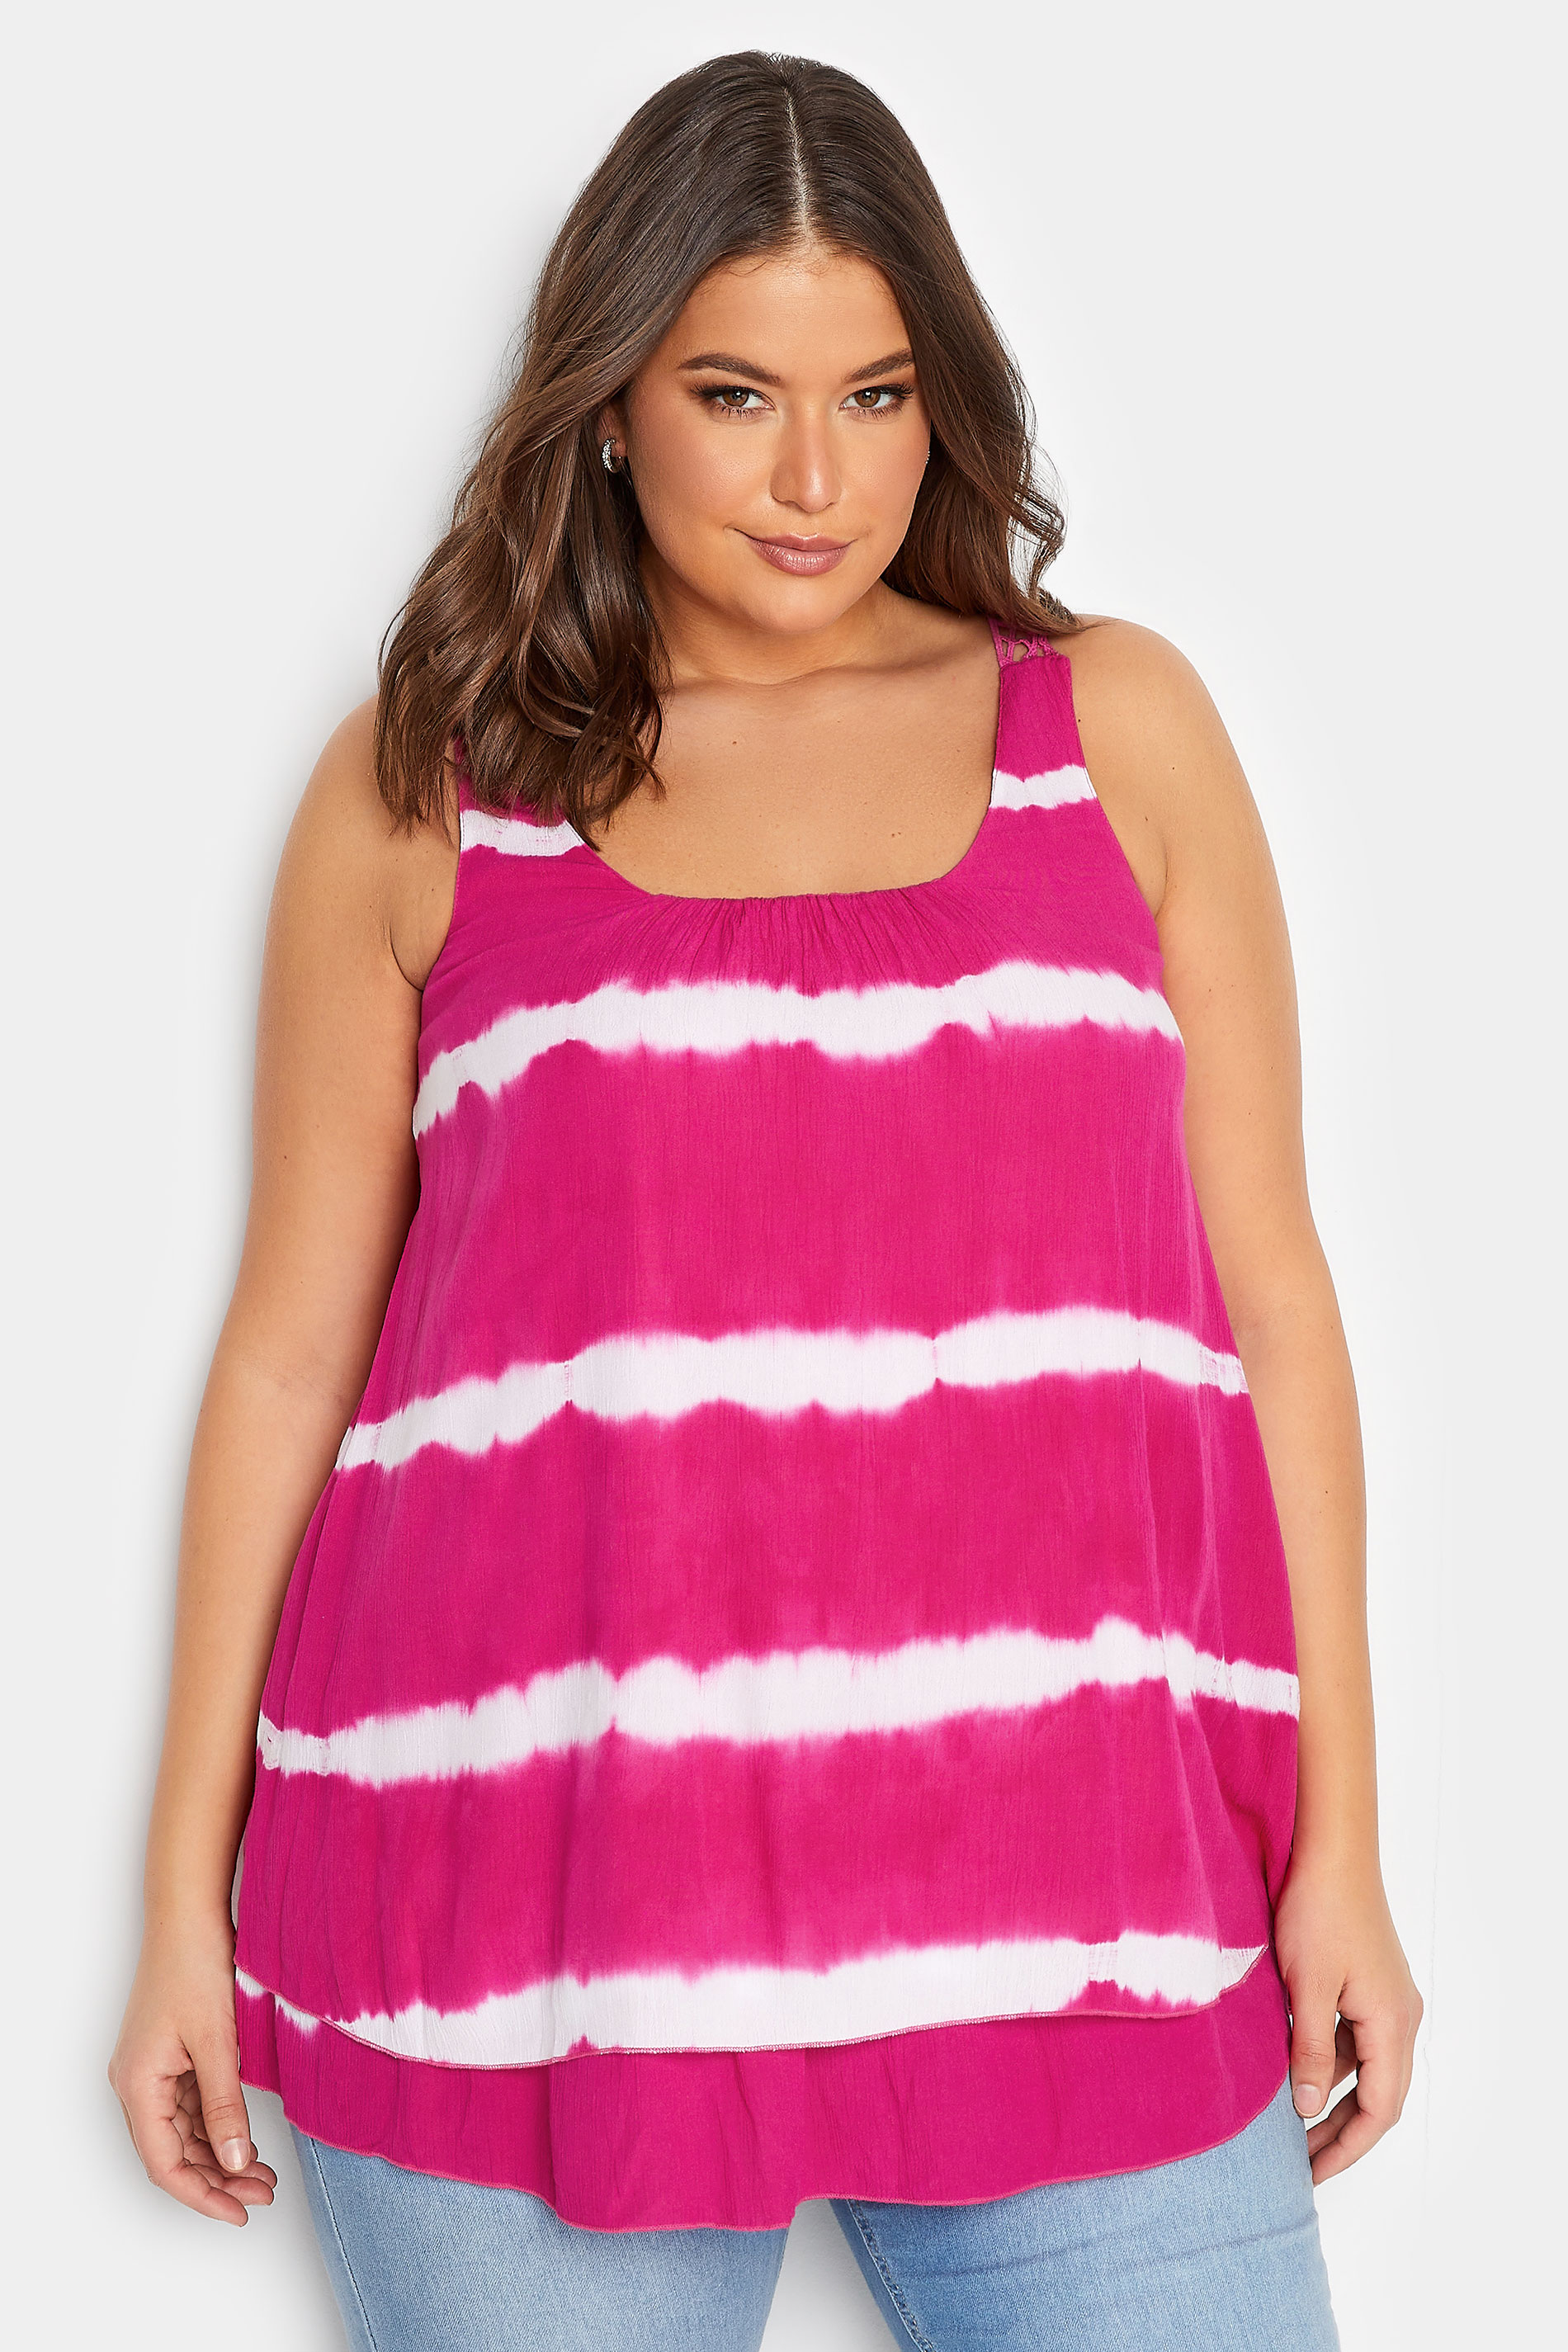 YOURS Plus Size Pink Tie Dye Crinkle Crochet Back Vest Top | Yours Clothing 3